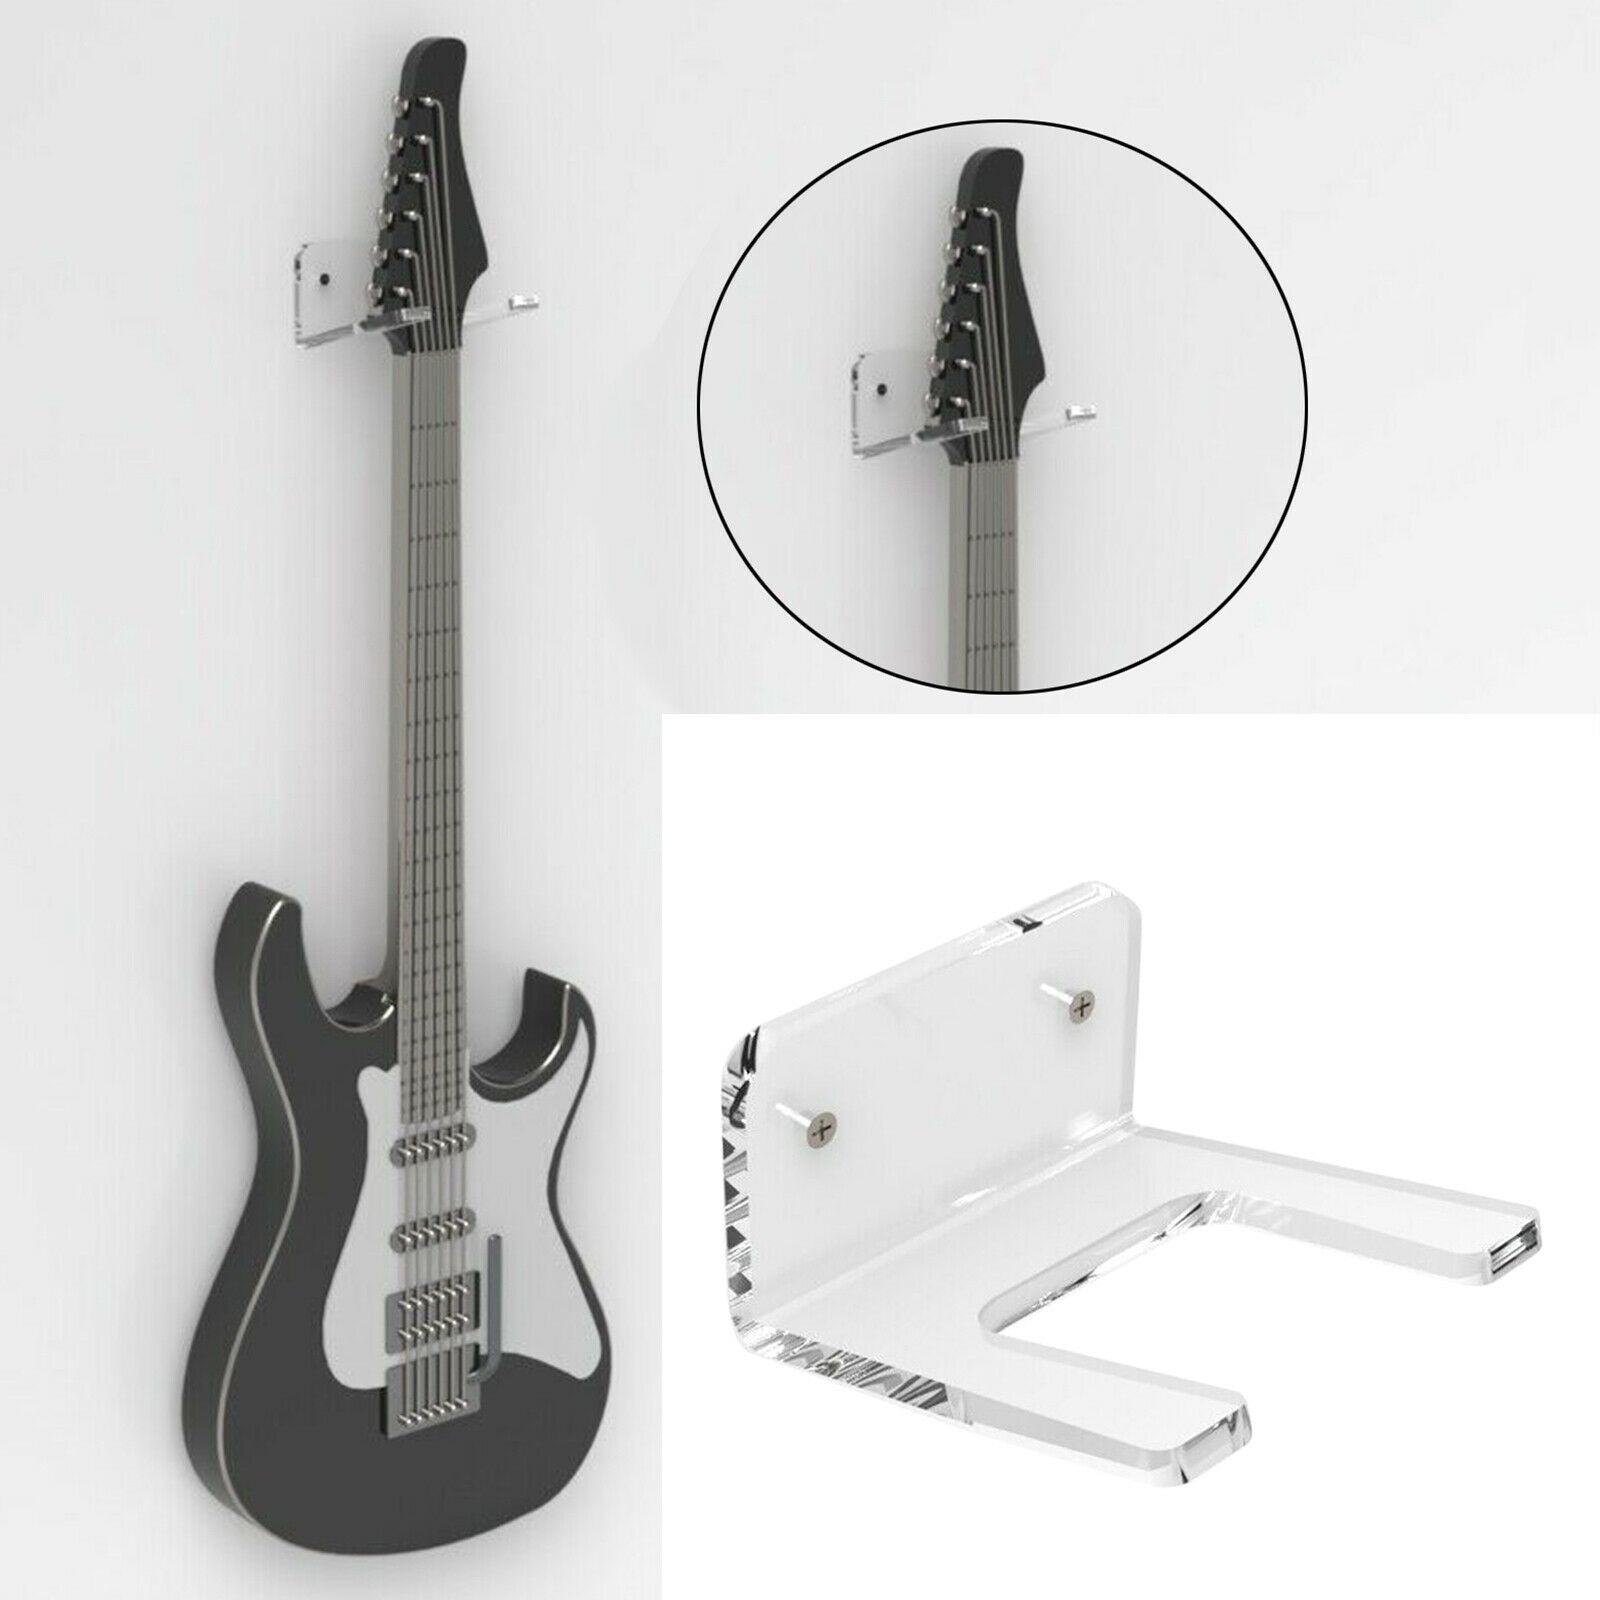 Wall Home Shop Guitar Hanger Stand For Hanging Guitar Save Space